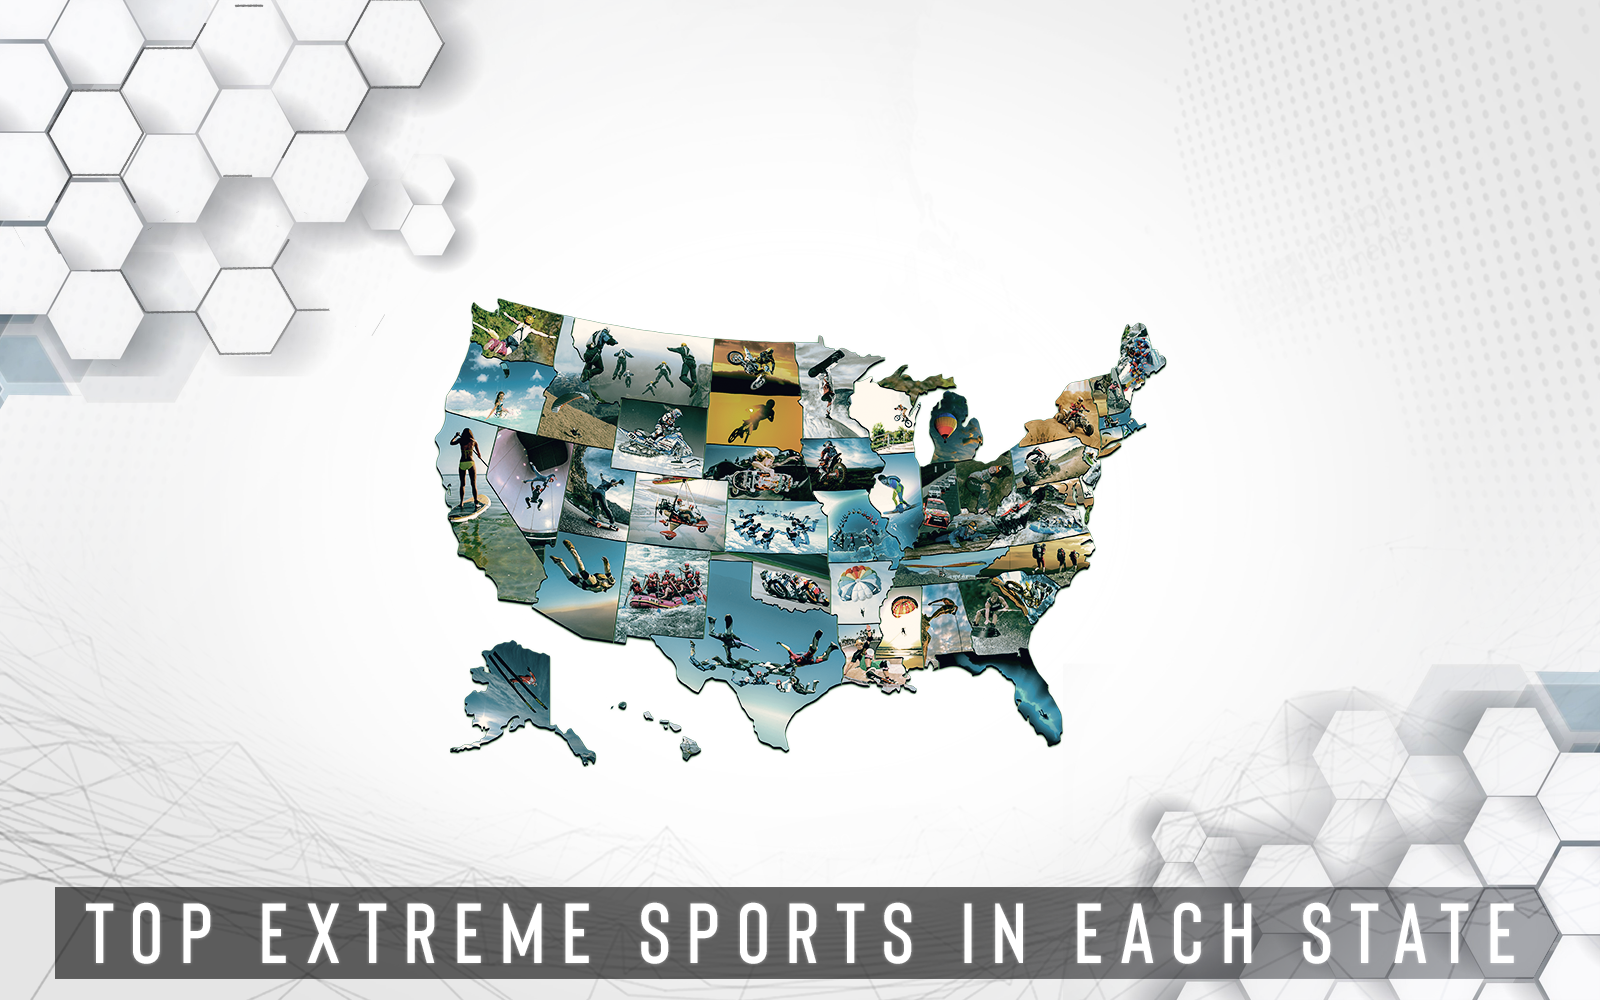 Top Extreme Sports in Each State